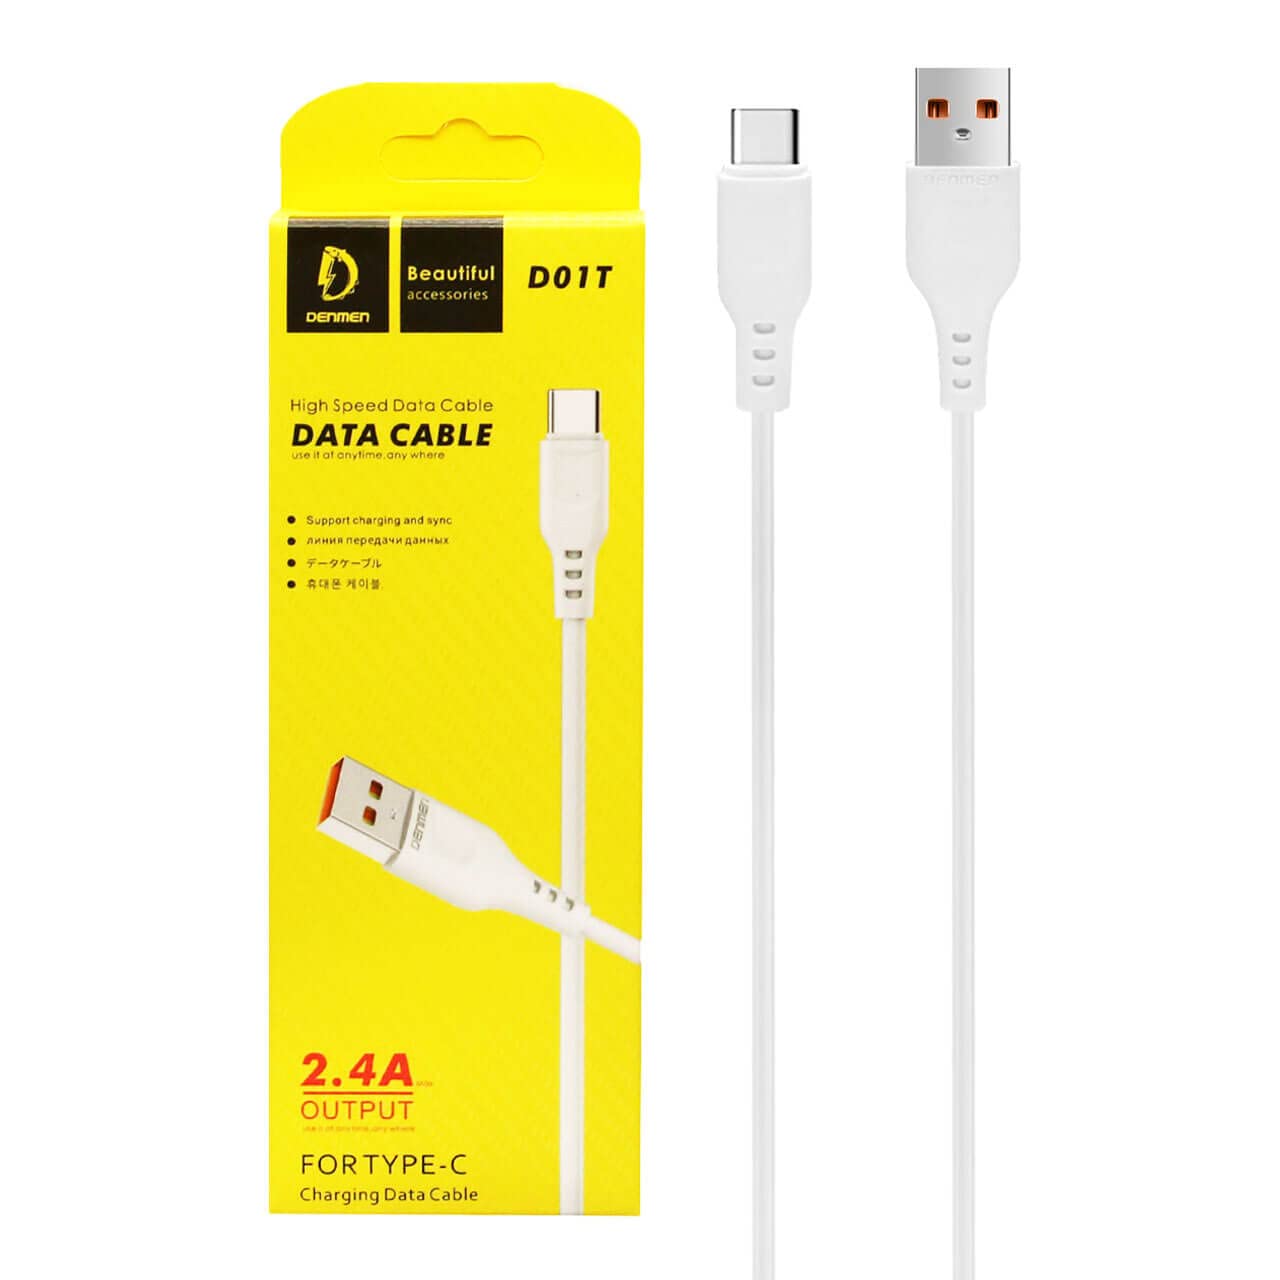 denmen Unbreakable 2.4A  type c  USB Data Cable  Fast Charging  Data Sync  1 Meter Cable Length